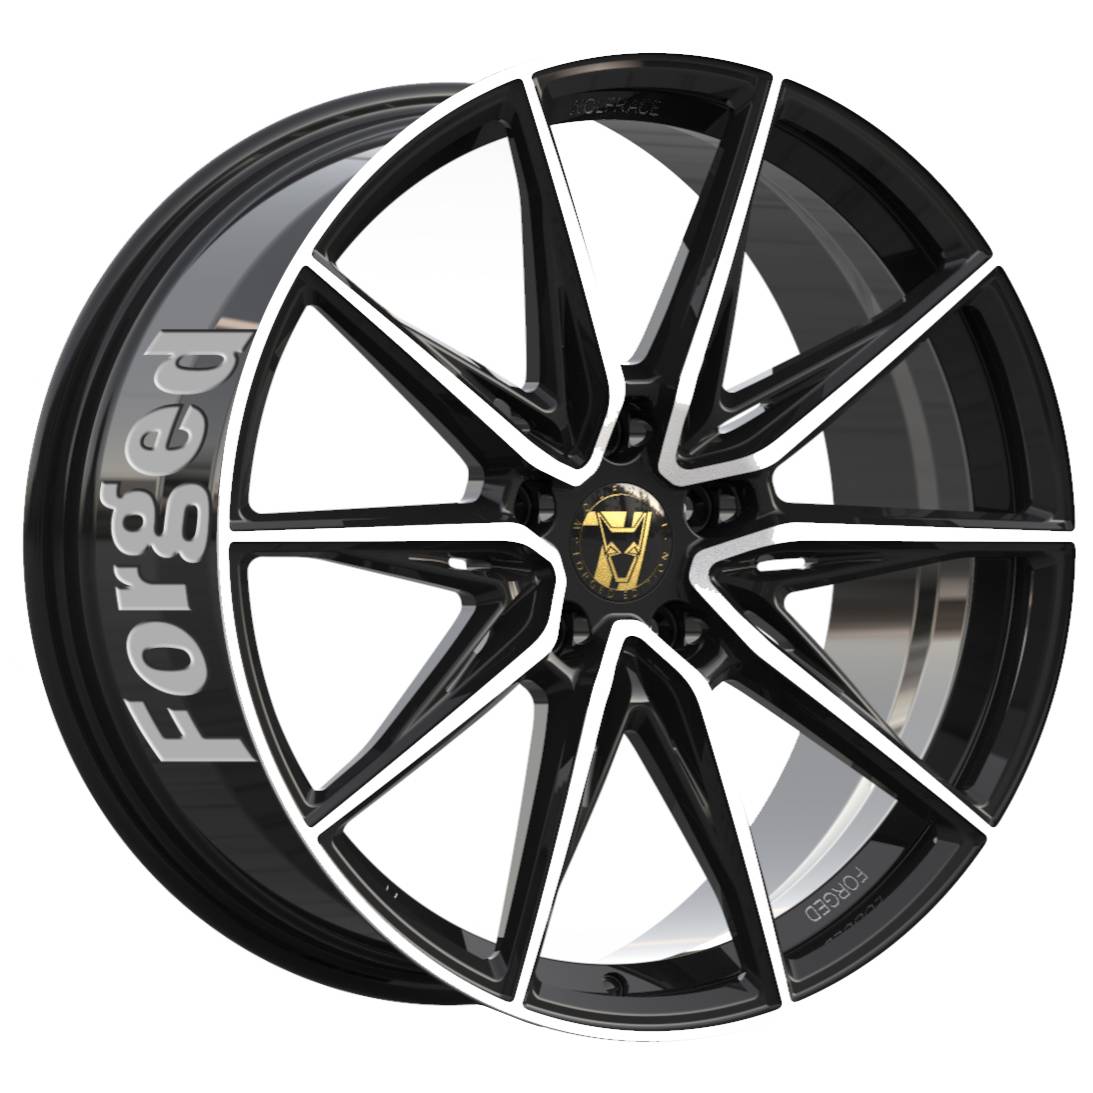 Demon Wheels 71 Forged Edition Urban Racer Forged [11.5x23] -5x114.3- ET 30